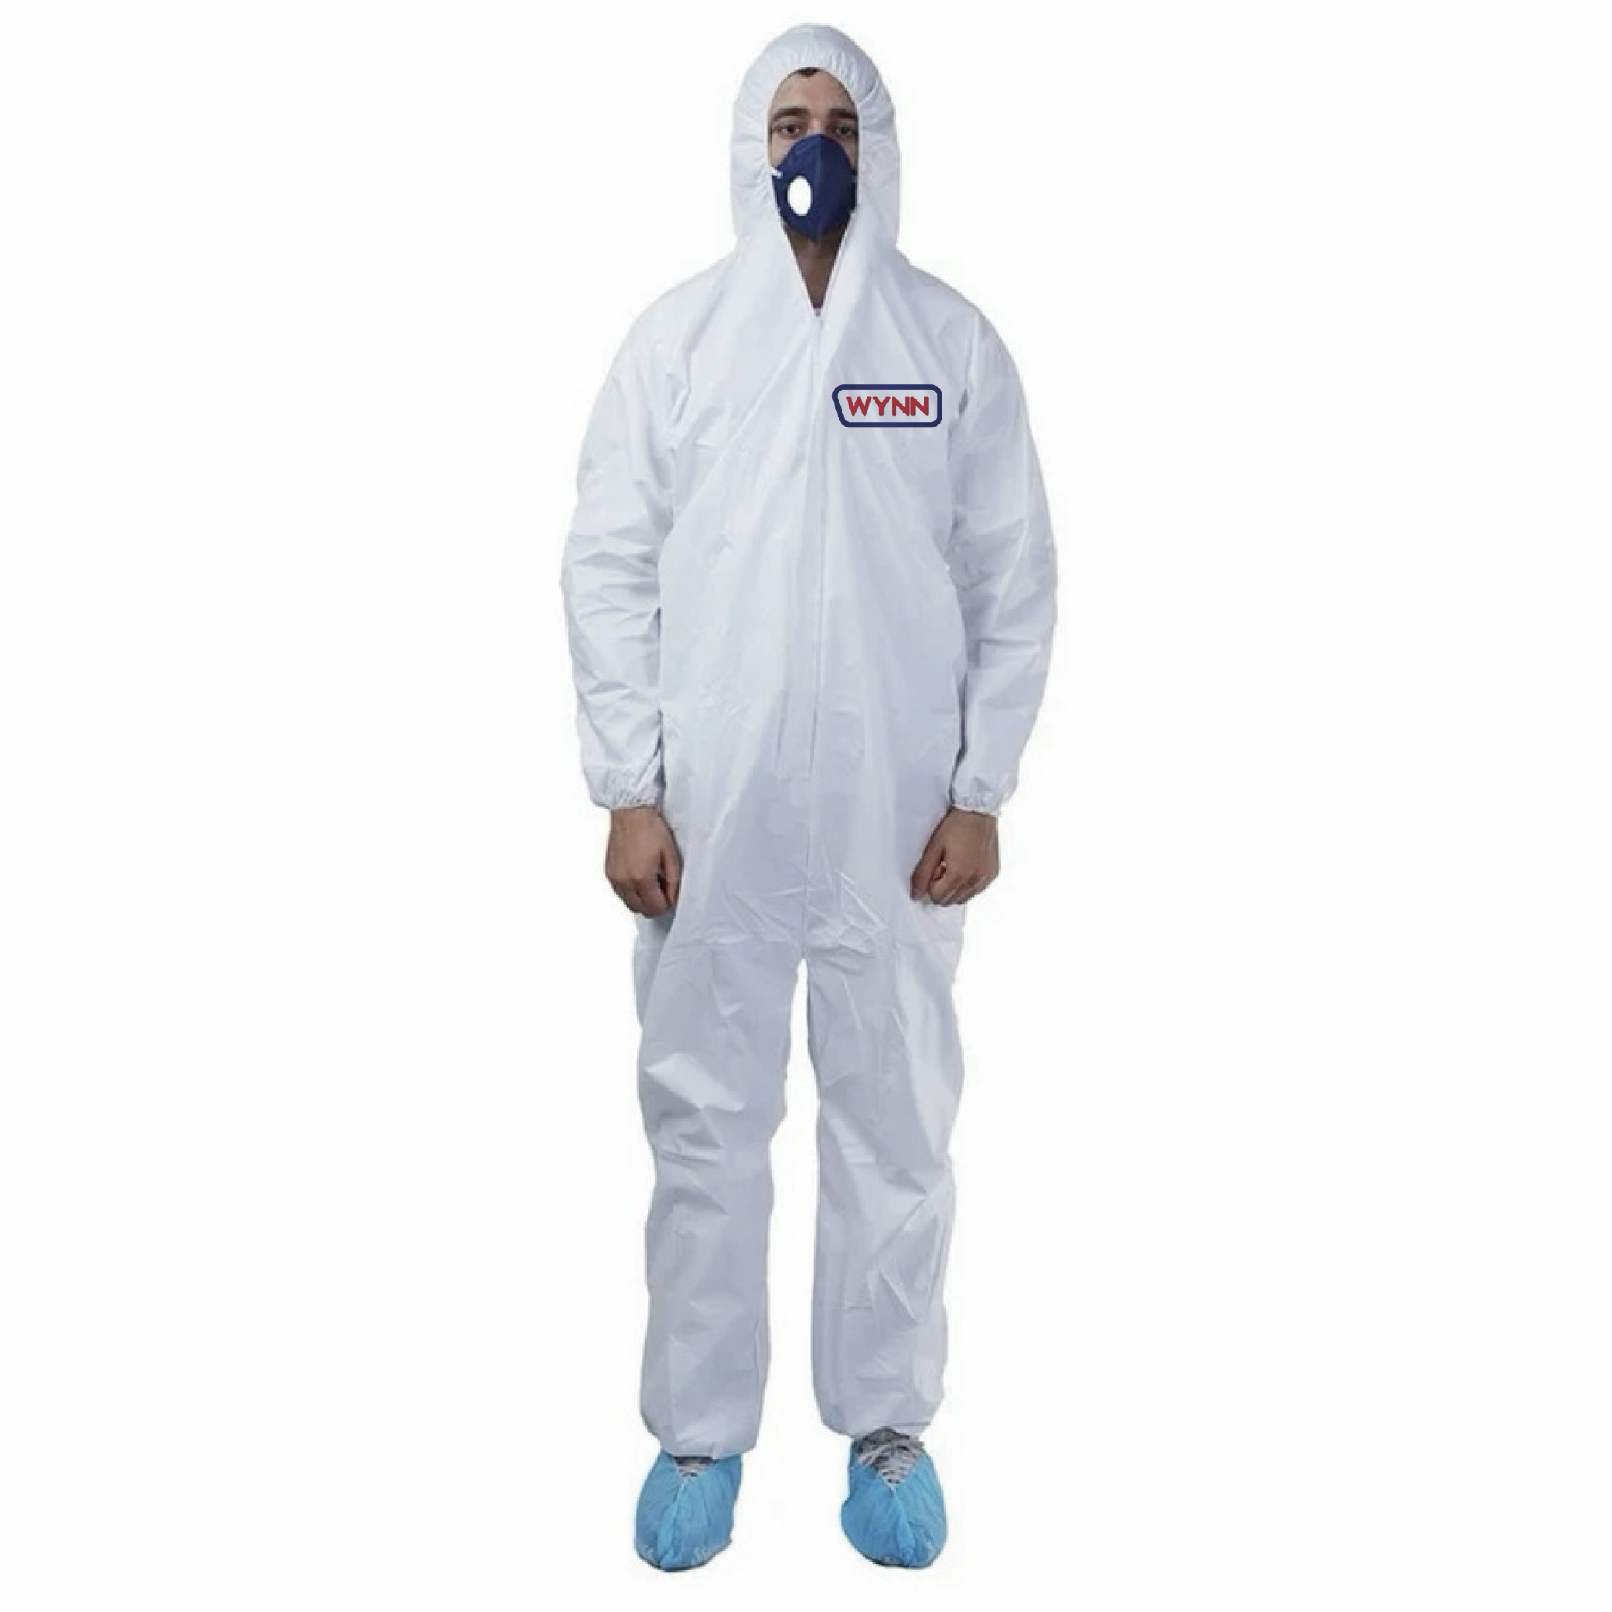 Wynn Disposable Coveralls - Heavy-Duty Protection